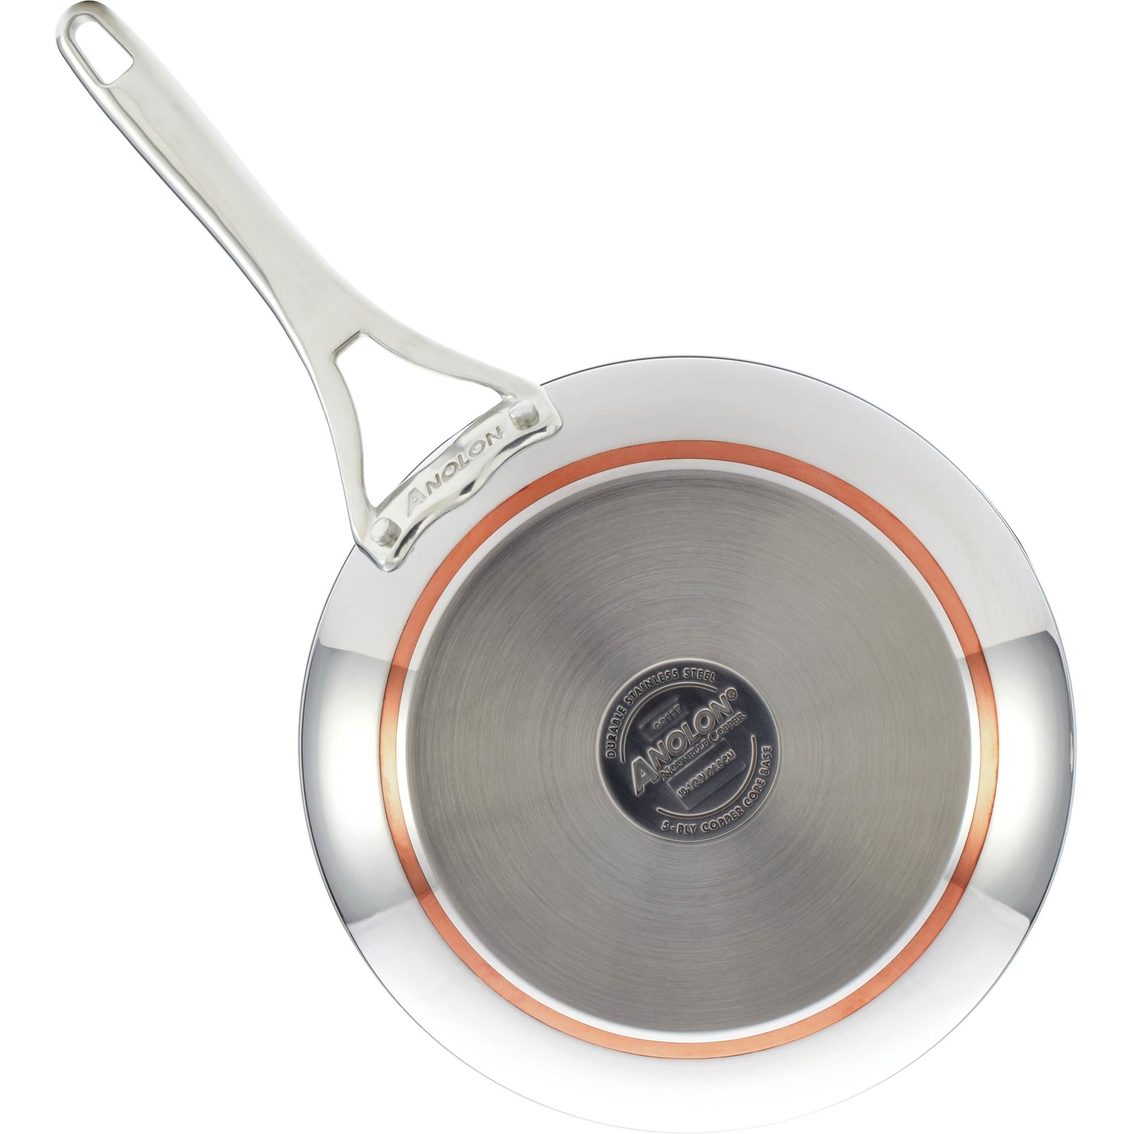 Anolon Nouvelle Copper Stainless Steel French Skillet - Image 3 of 4